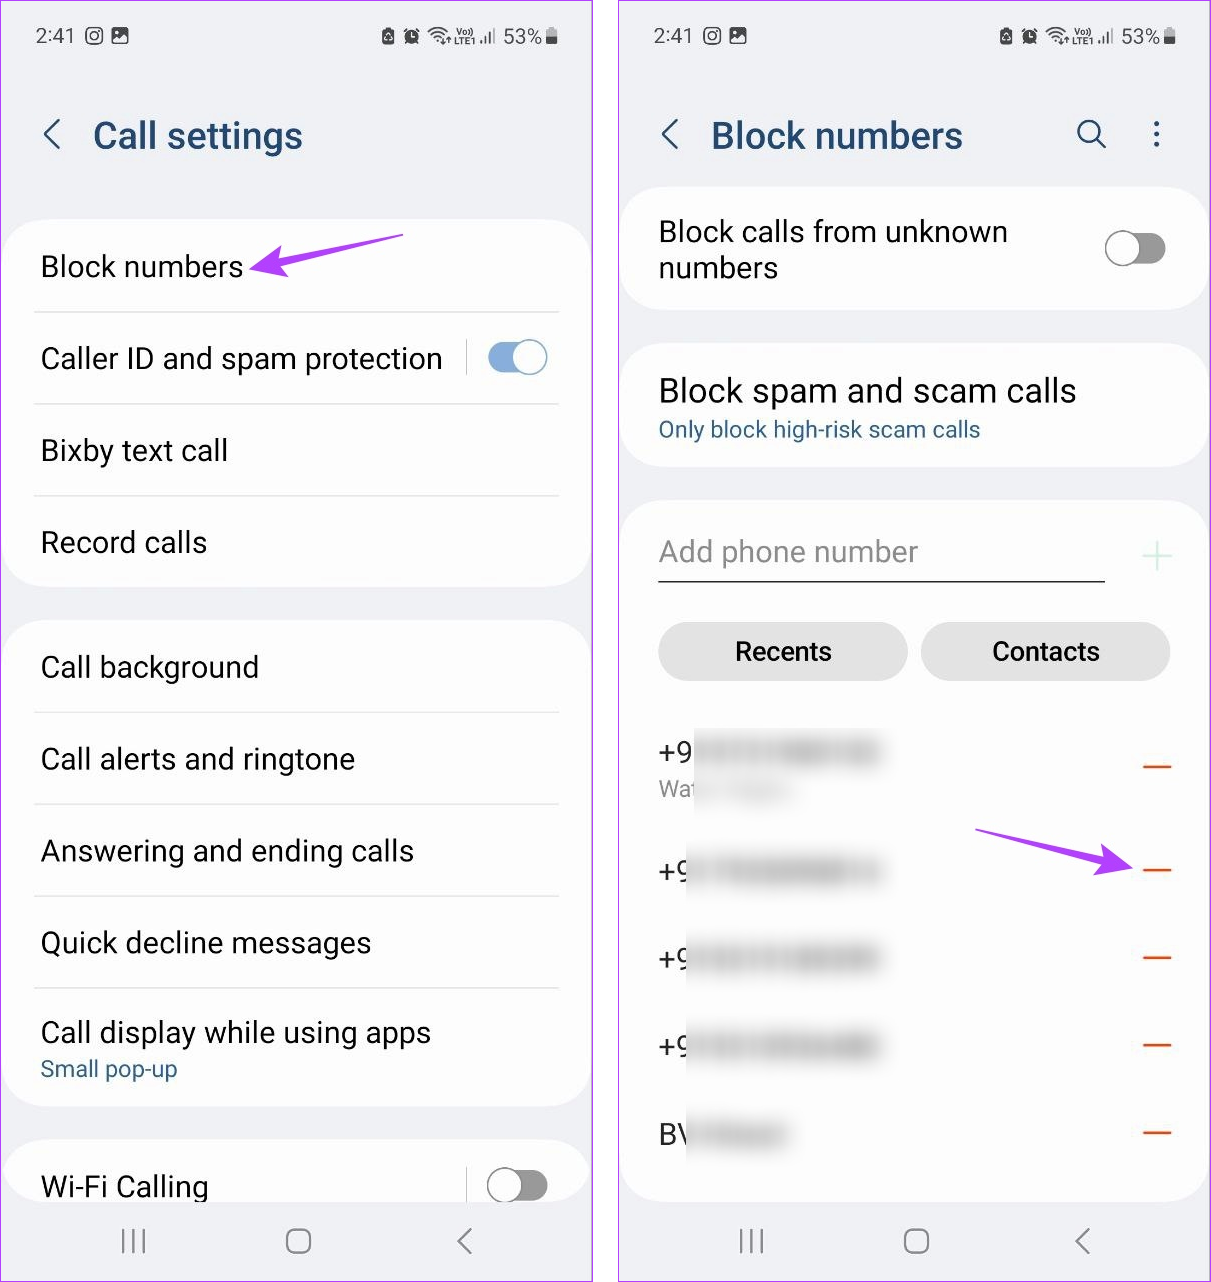 Tap on Block numbers & tap on the – icon